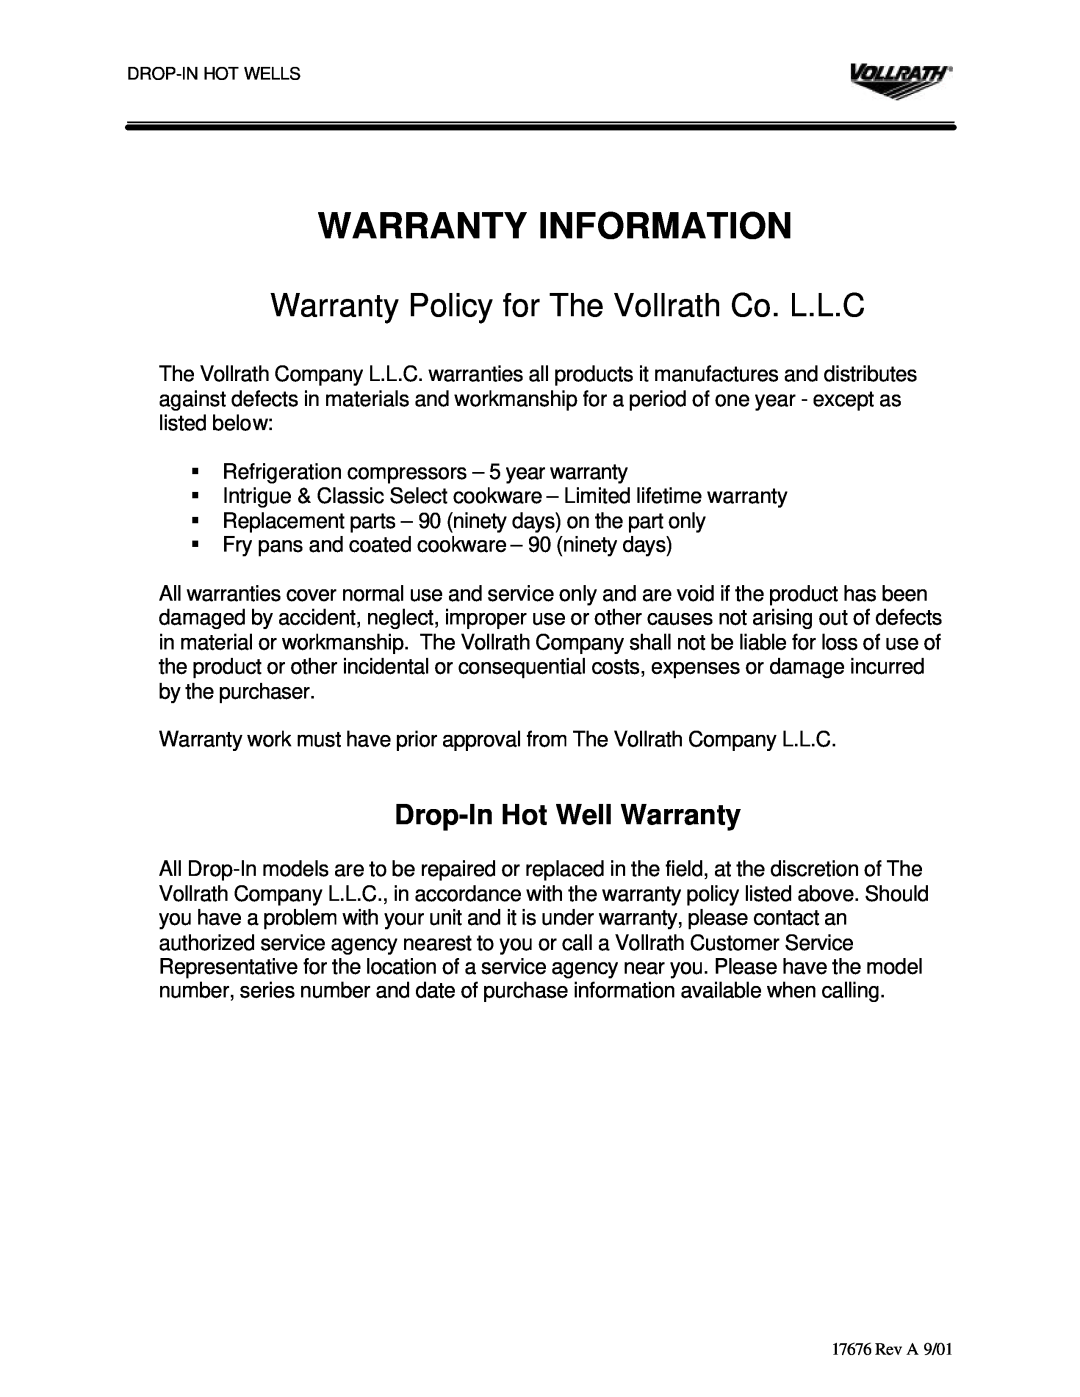 The Vollrath Co Drop-In Hot Wells manual Warranty Information, Warranty Policy for The Vollrath Co. L.L.C 